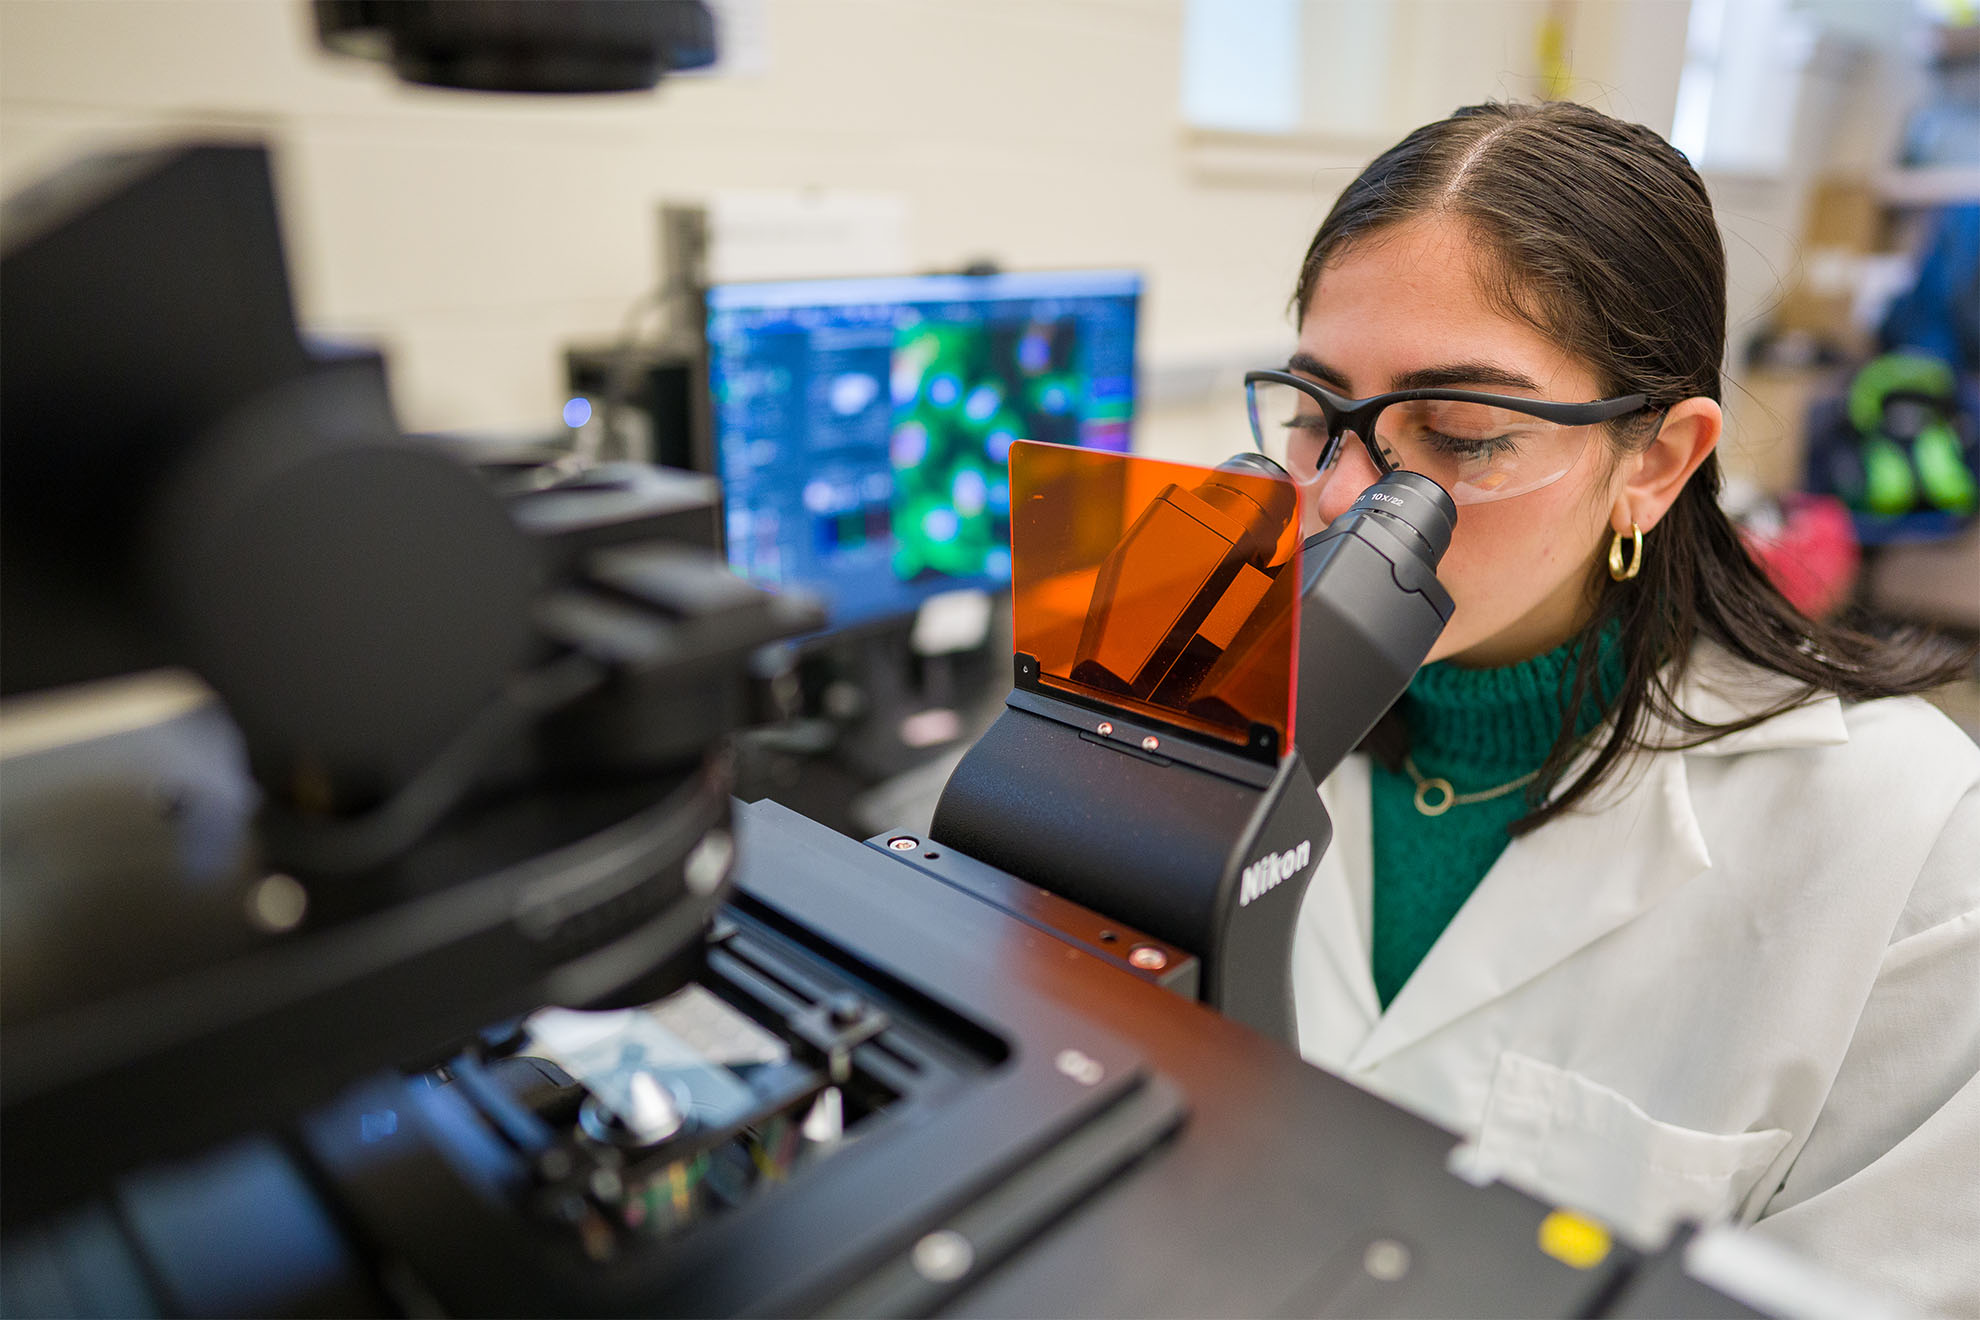 Graduate student Gabriella Palermo looks into a confocal microscope at the UNH University Instrumentation Center.